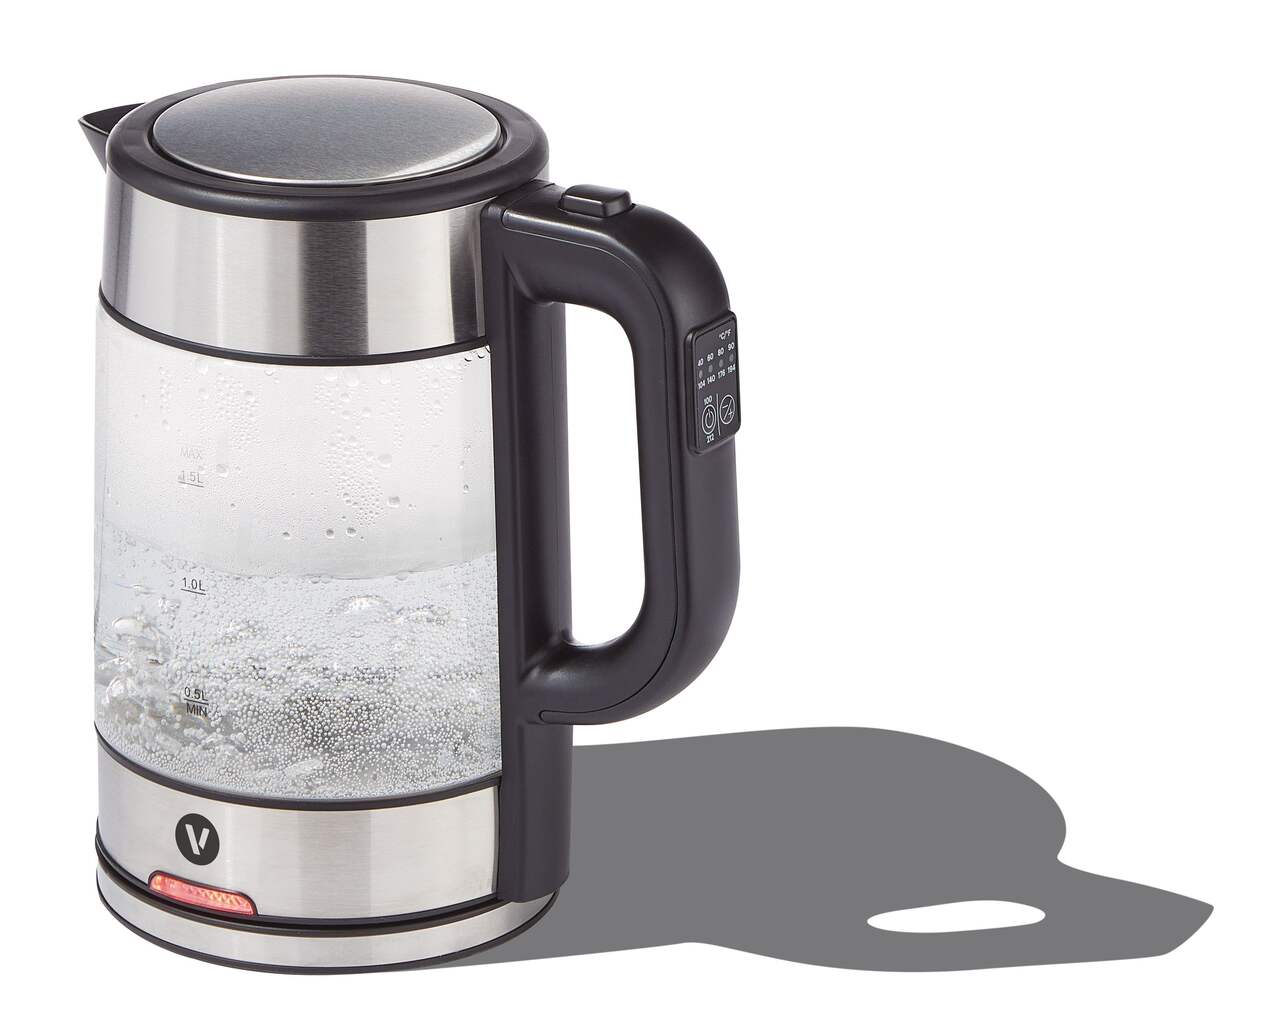 https://media-www.canadiantire.ca/product/living/kitchen/kitchen-appliances/0430191/vida-by-paderno-1-7l-variable-temperature-glass-kettle-bb99df40-0854-4d16-983b-ff4ae26e741d-jpgrendition.jpg?imdensity=1&imwidth=640&impolicy=mZoom